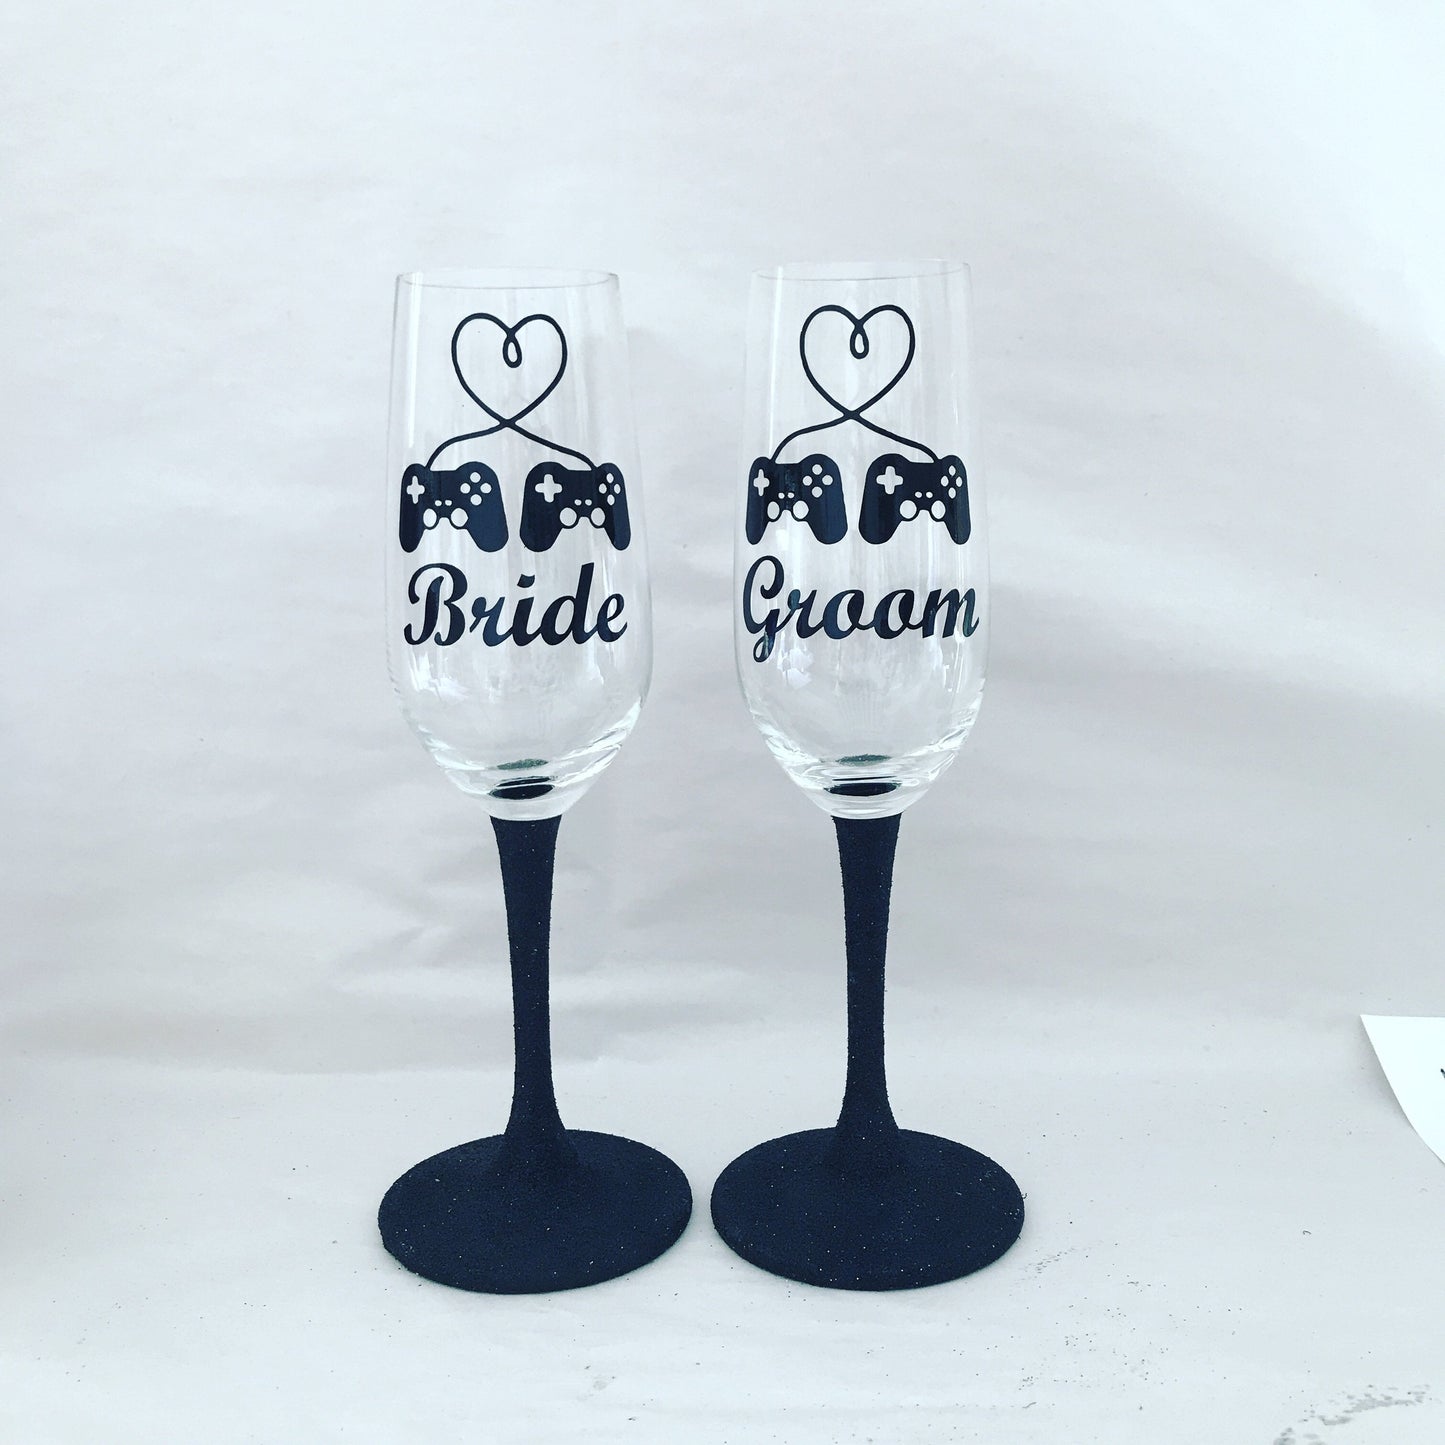 Bride and groom PlayStation glasses